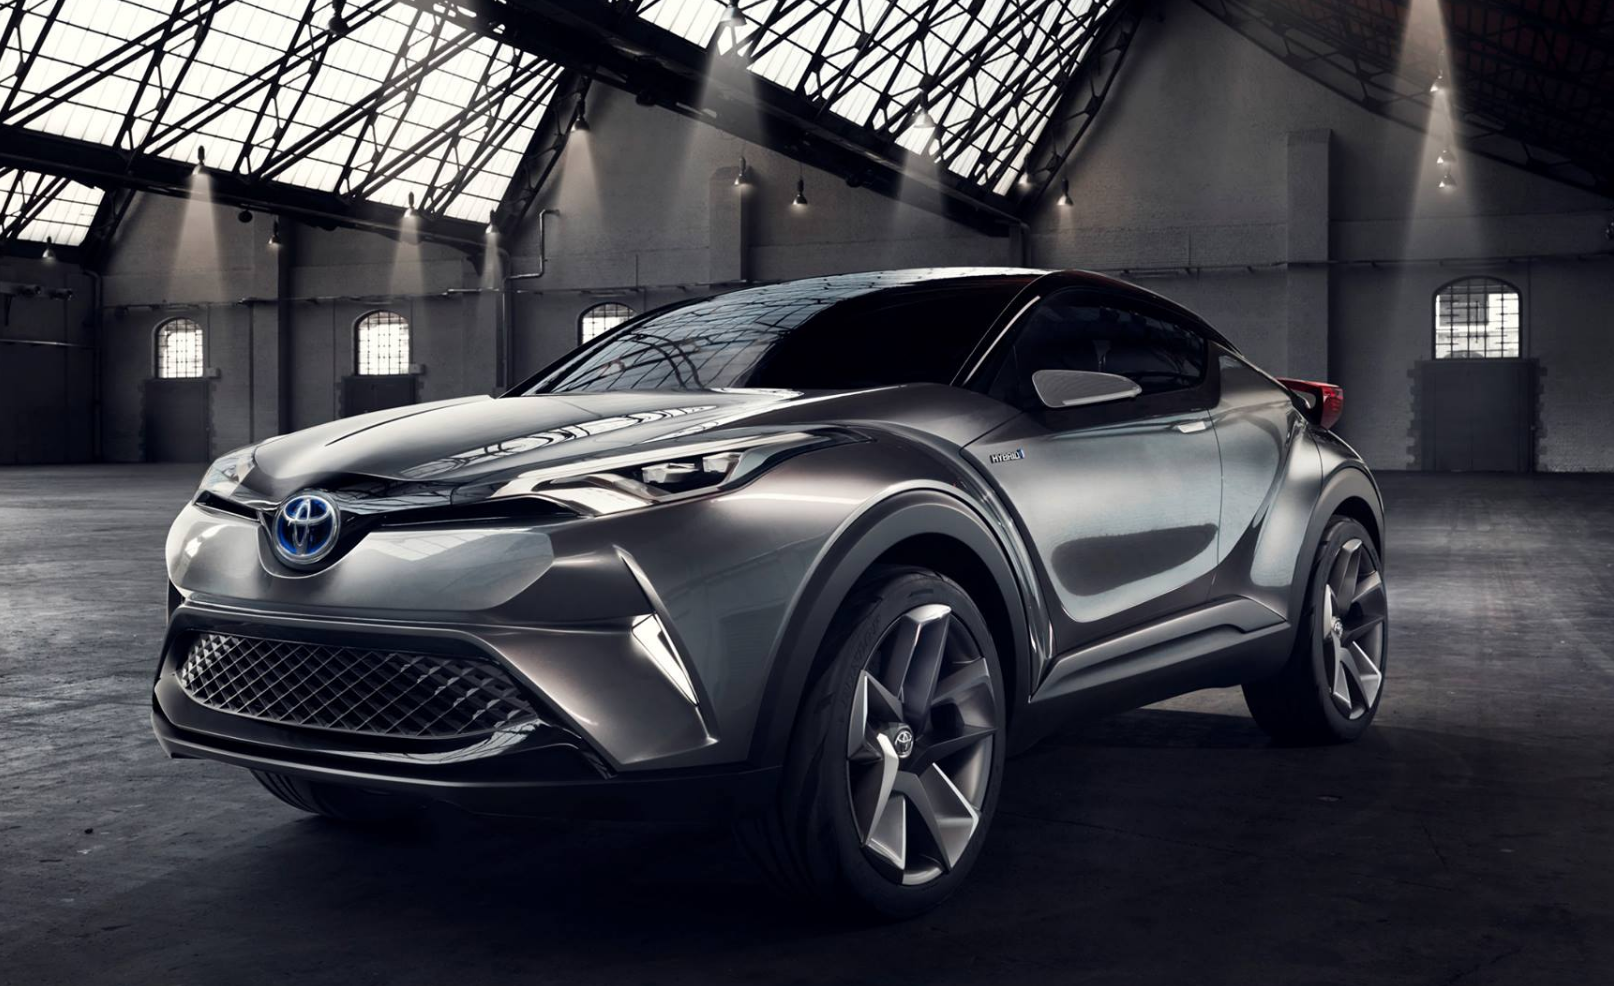 Taking A Closer Look at the New Toyota C-HR